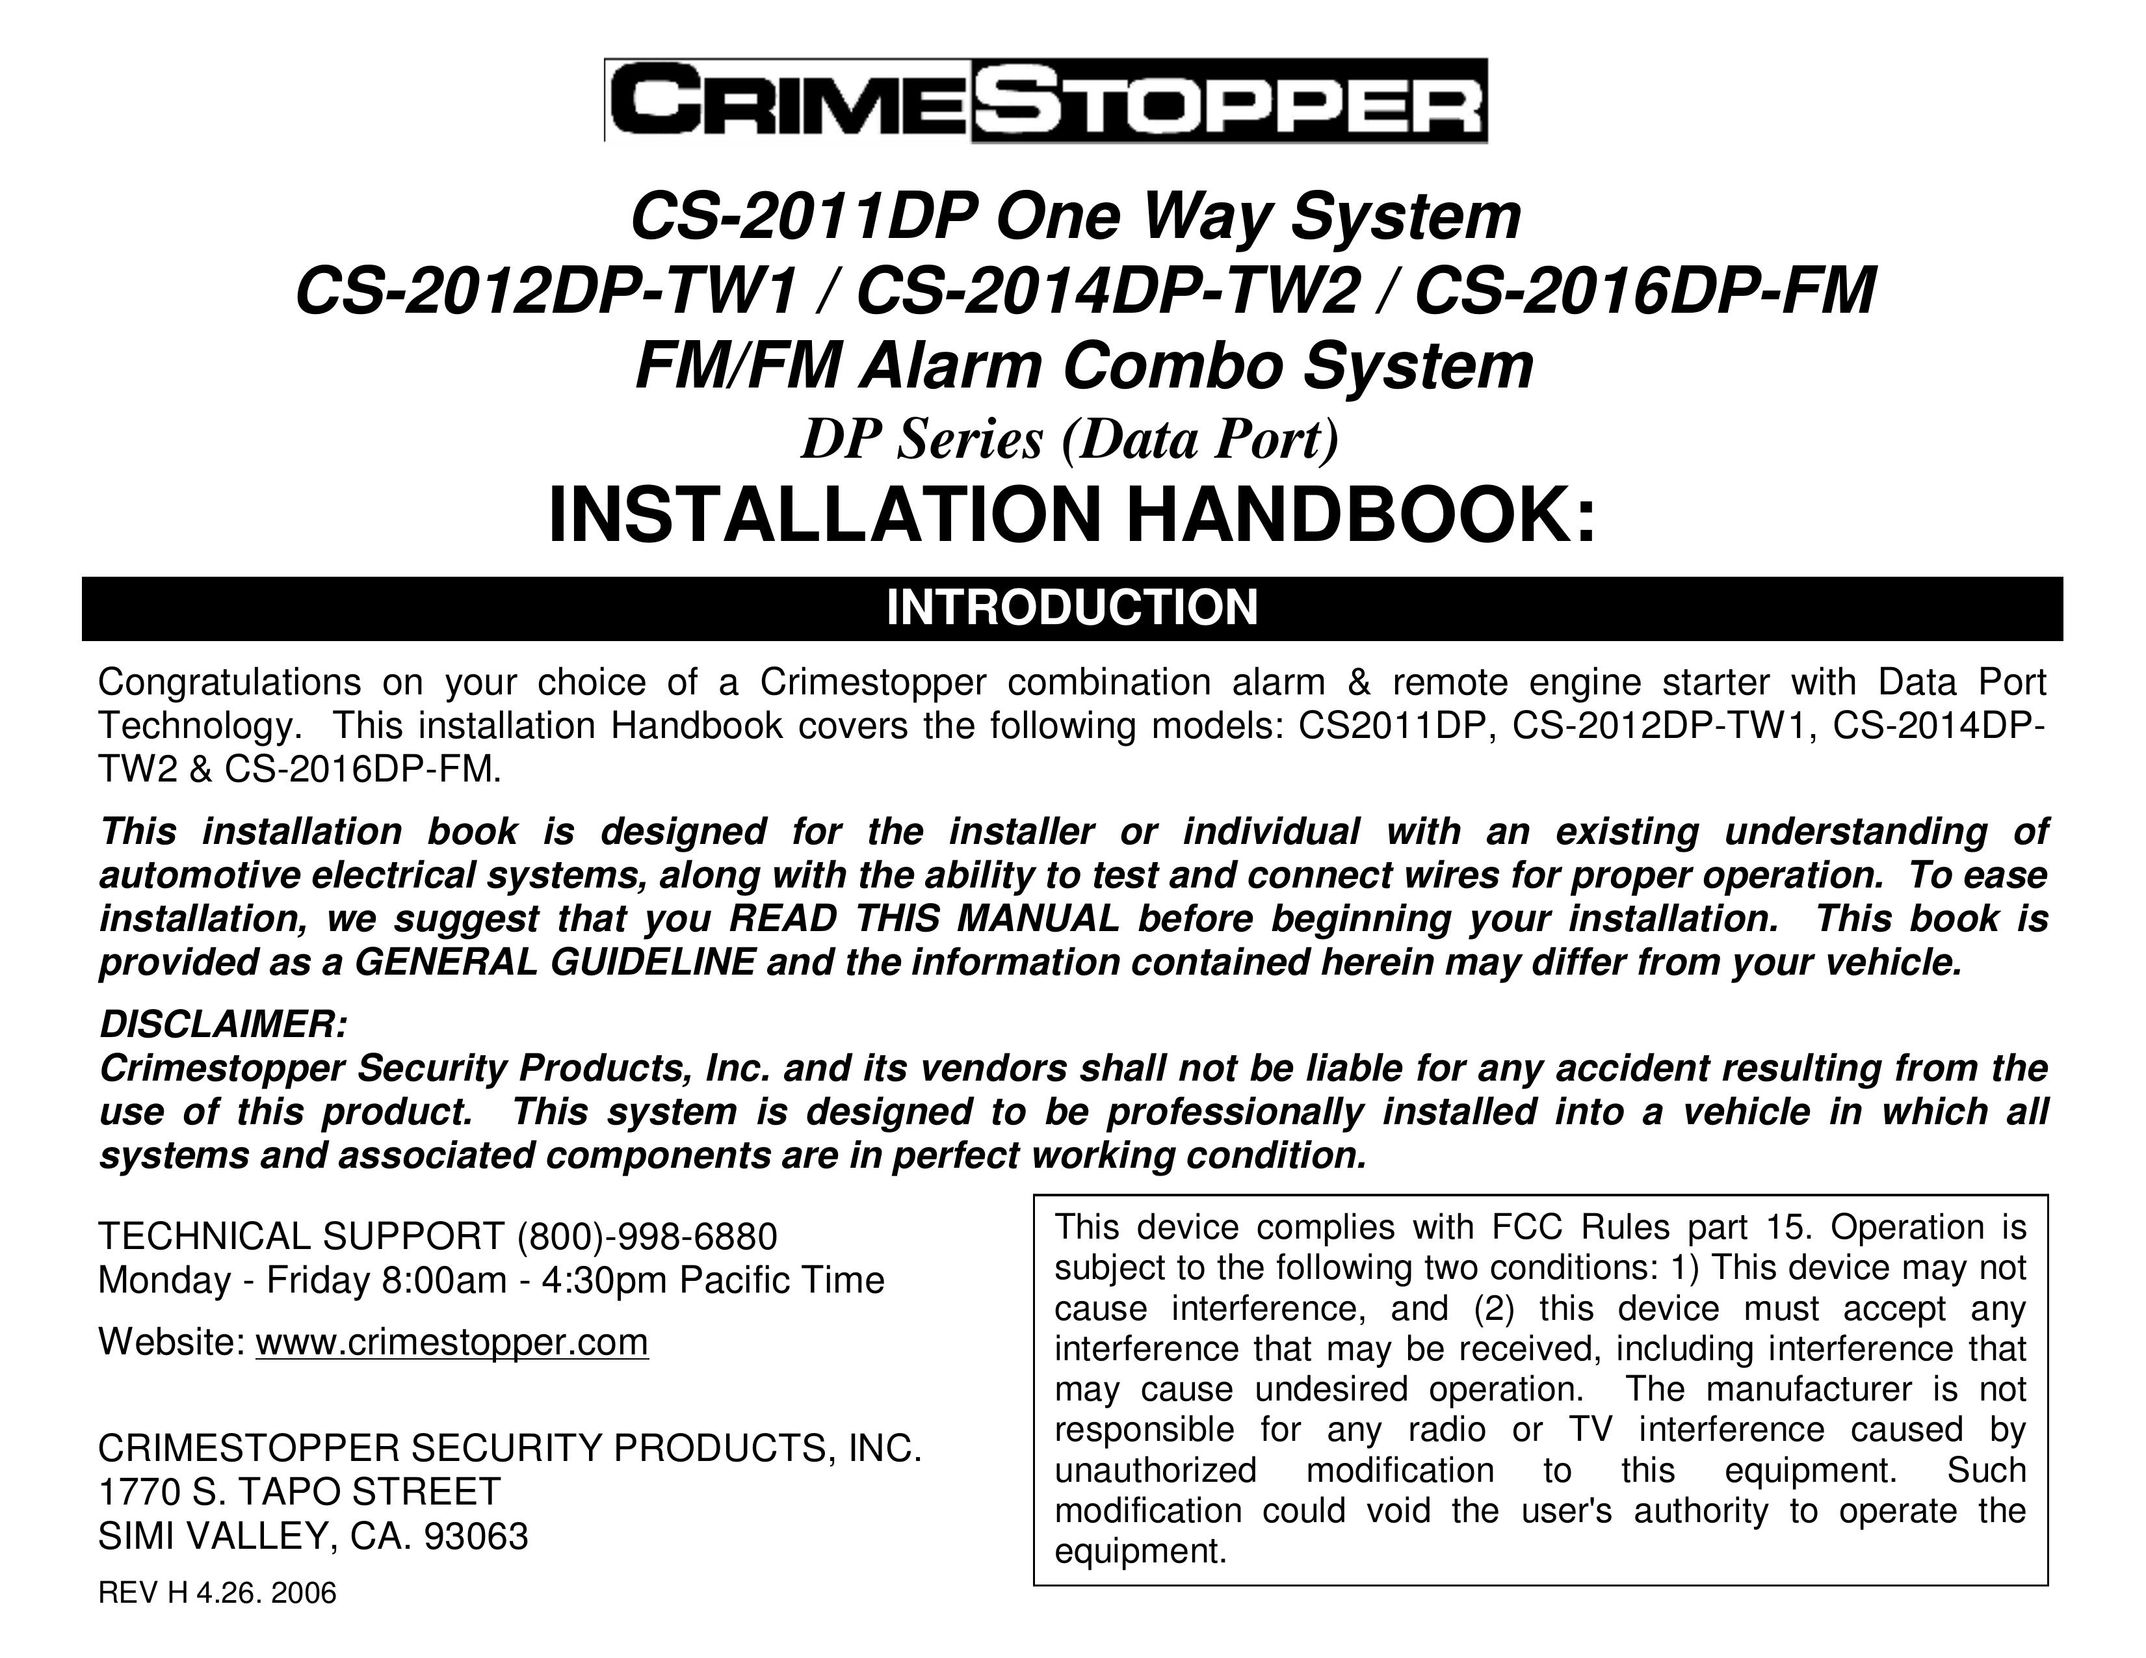 Crimestopper Security Products CS-2014DP-TW2 Car Video System User Manual